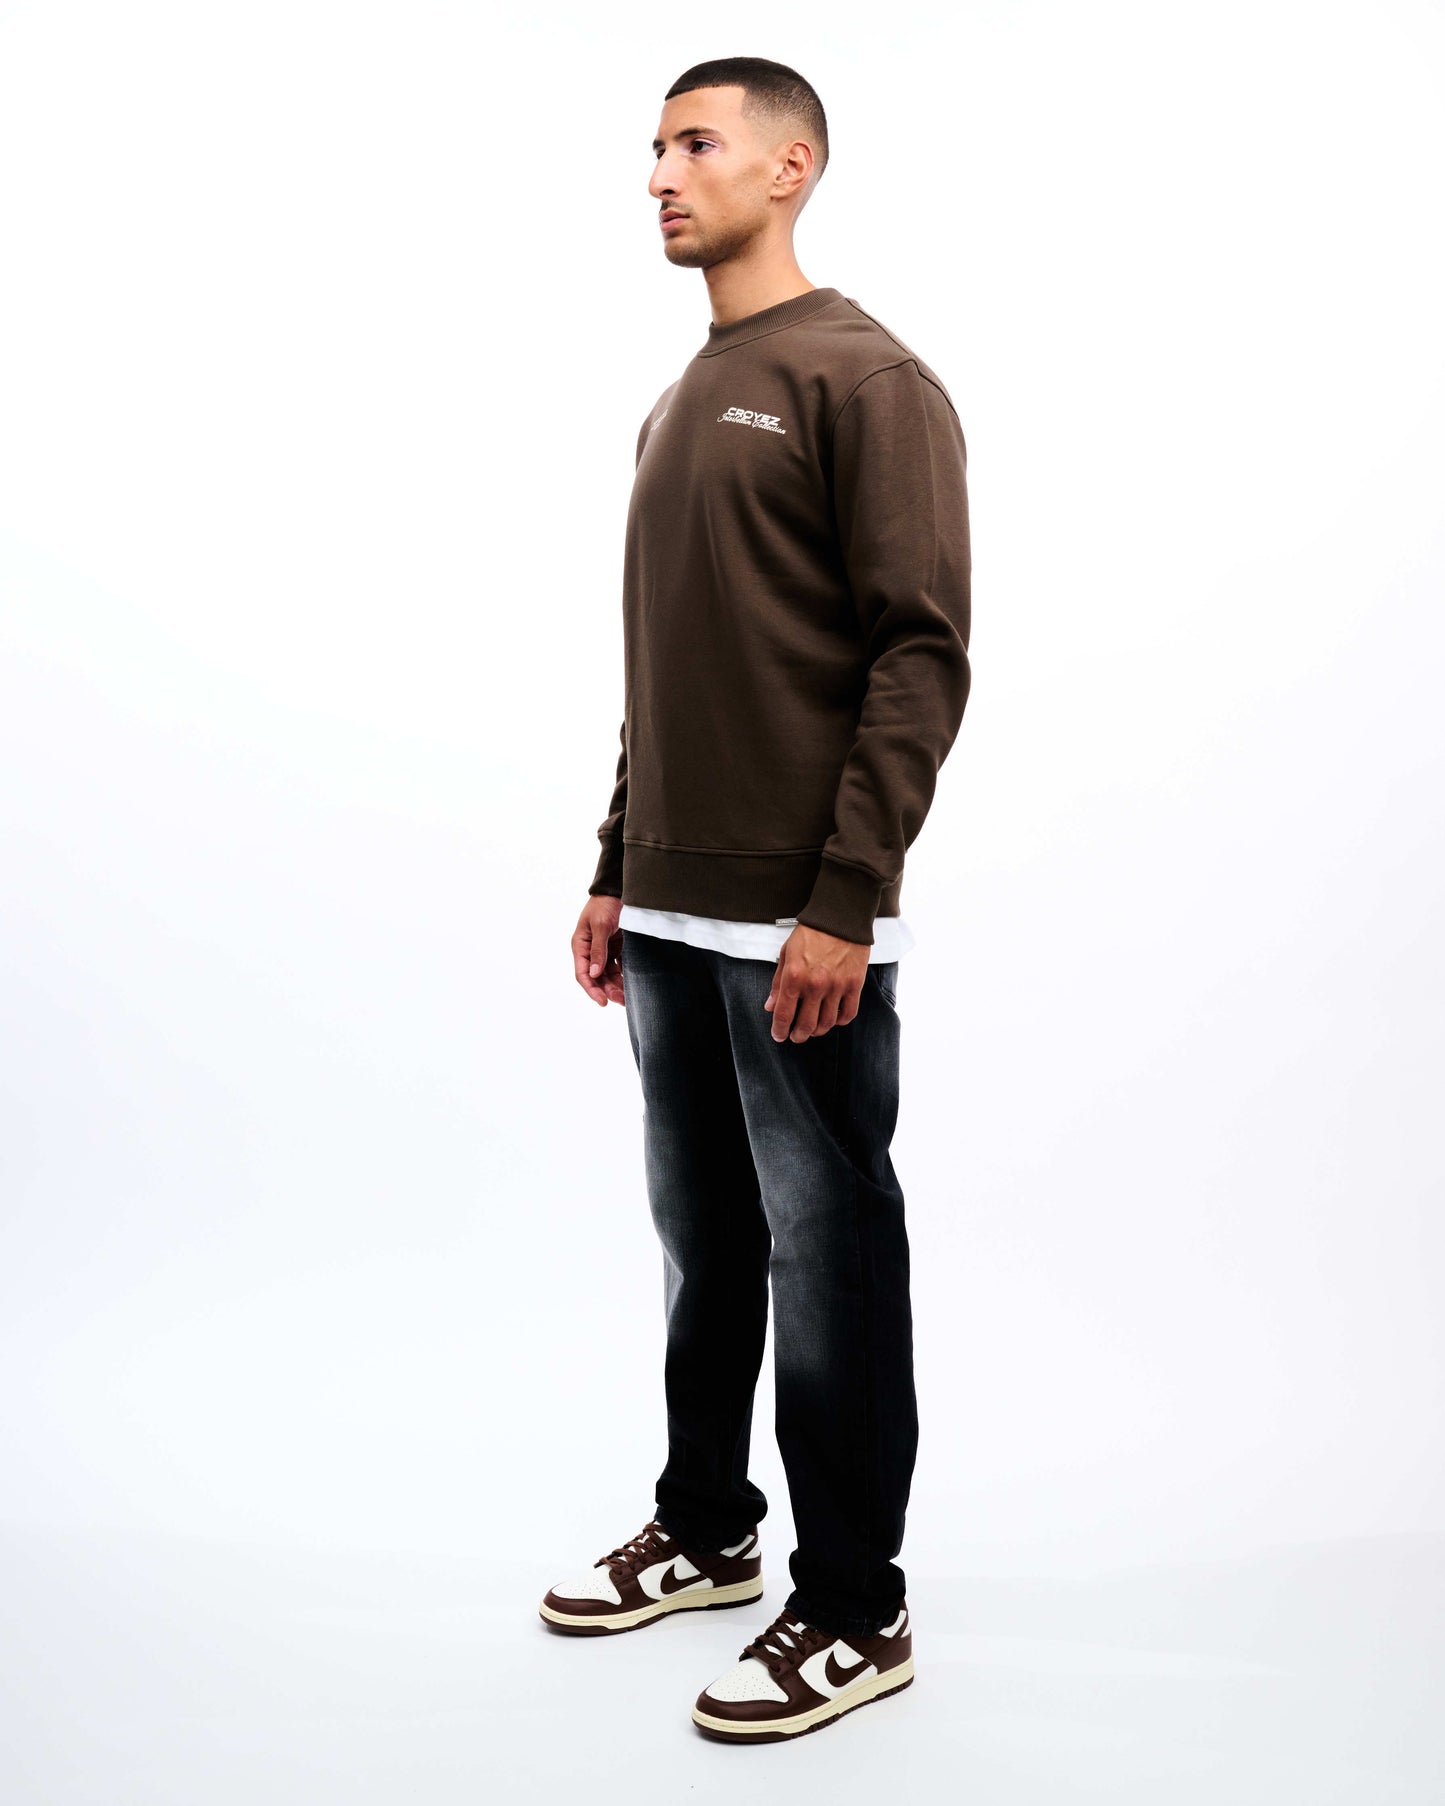 CROYEZ COLLECTION SWEATER - BROWN/VINTAGE WHITE